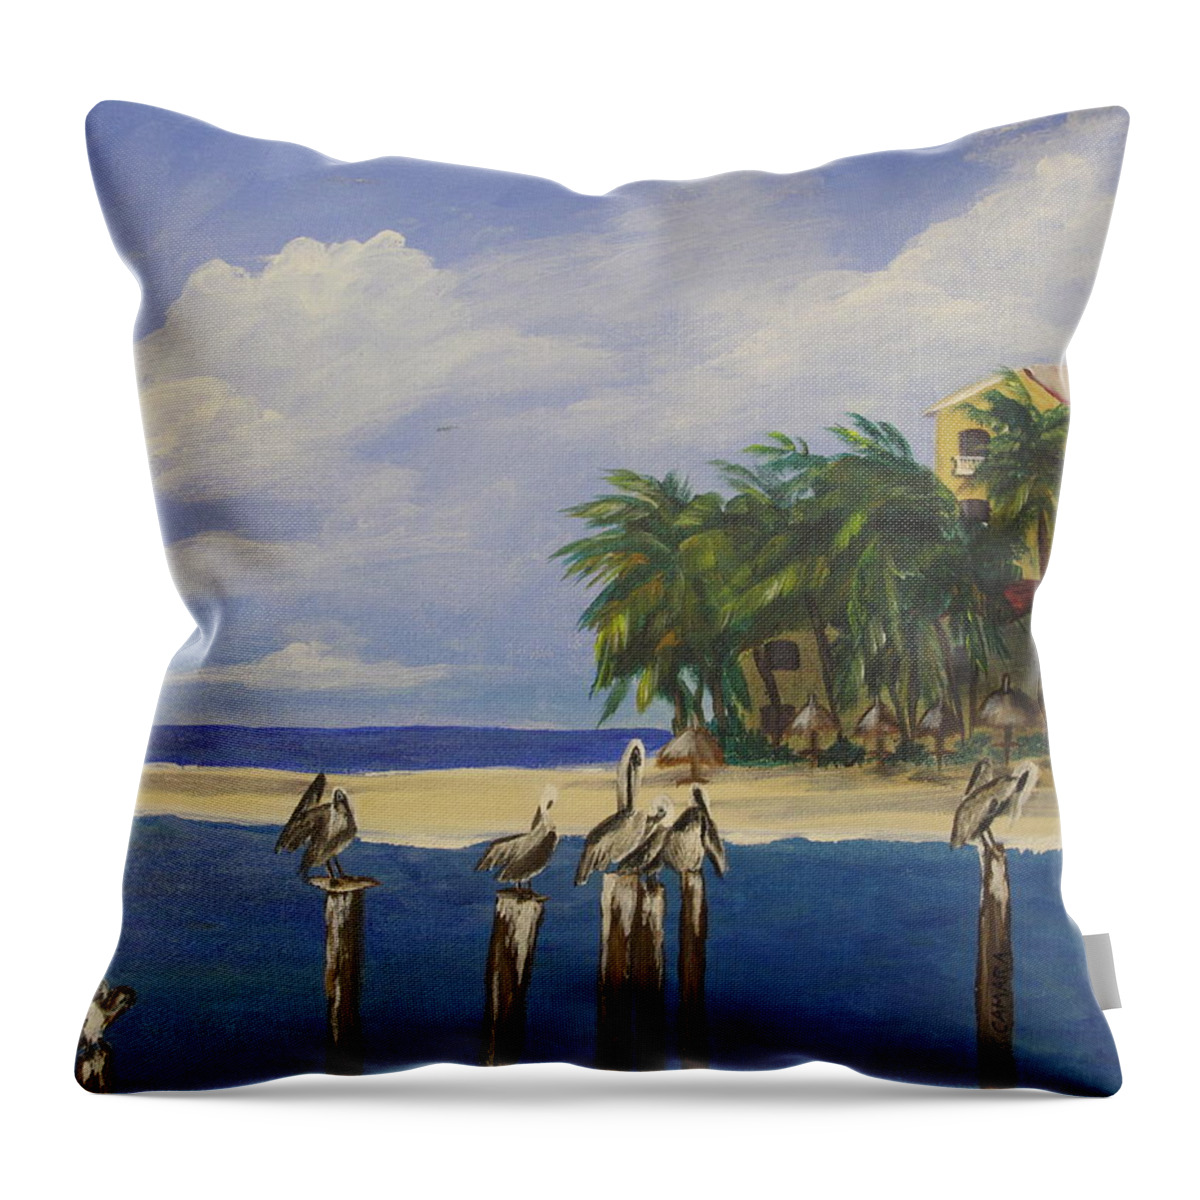 Seascape Throw Pillow featuring the painting Pelican Perch by Kathie Camara